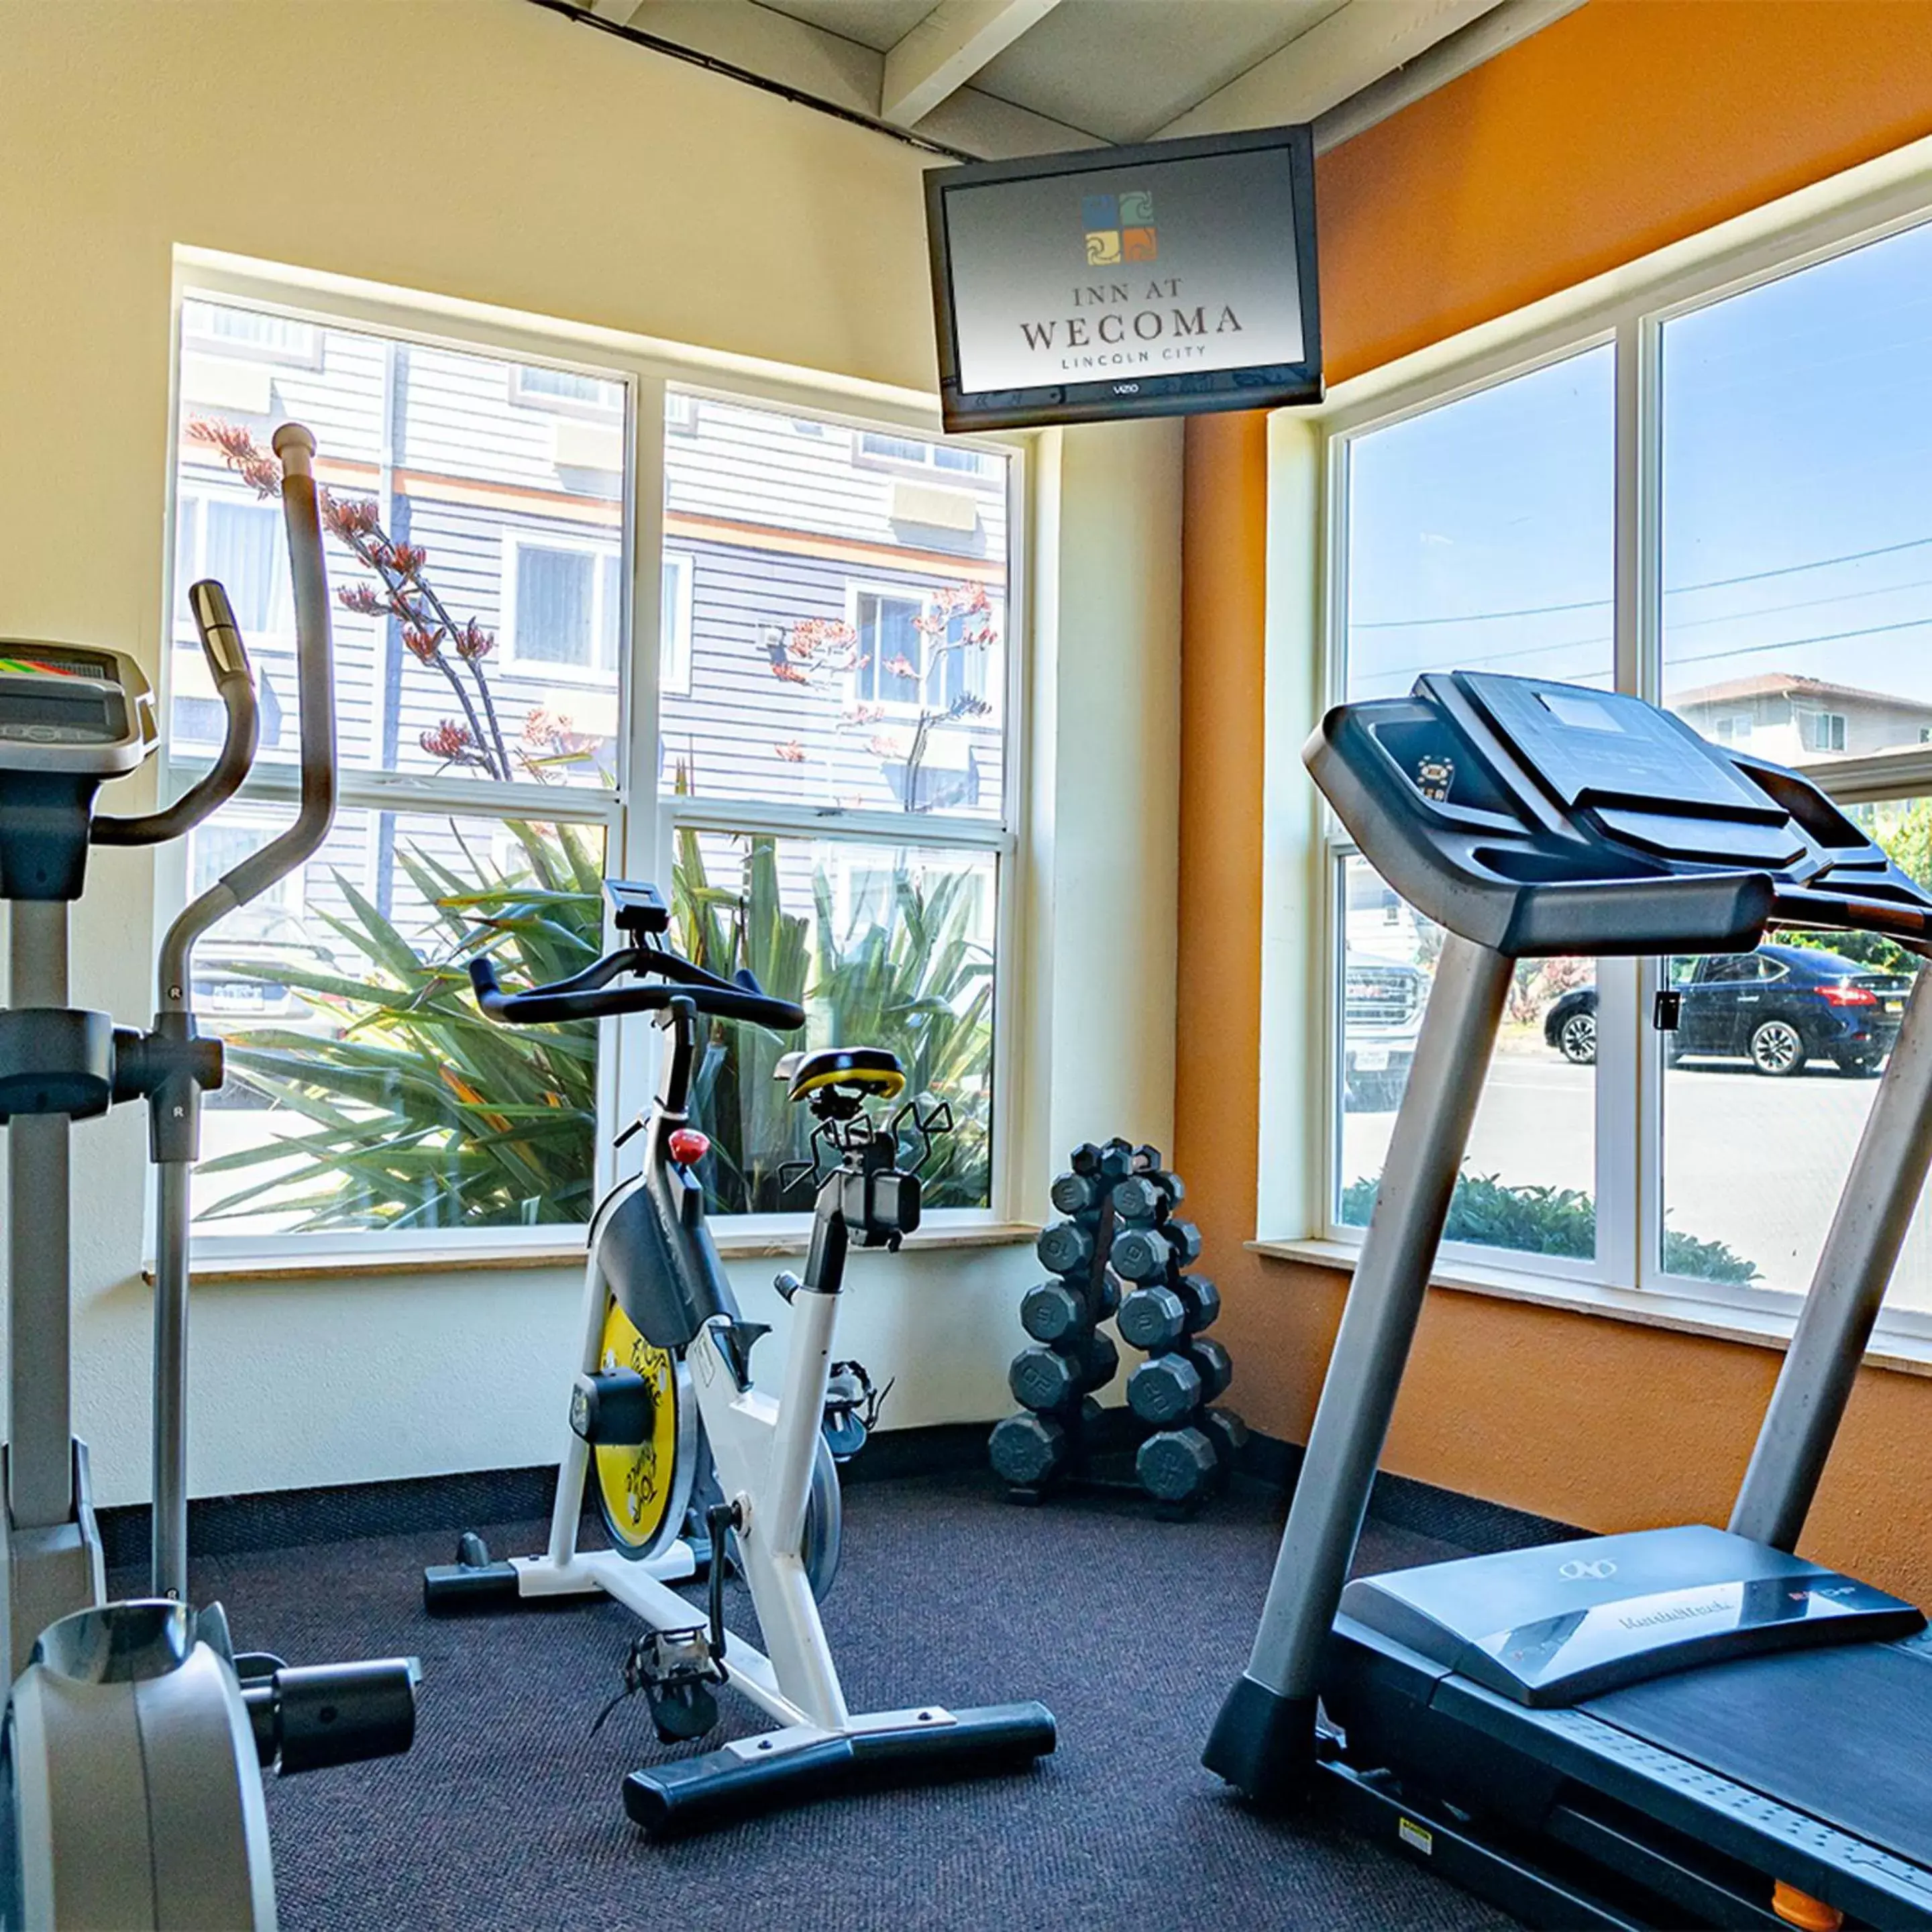 Fitness Center/Facilities in Inn at Wecoma